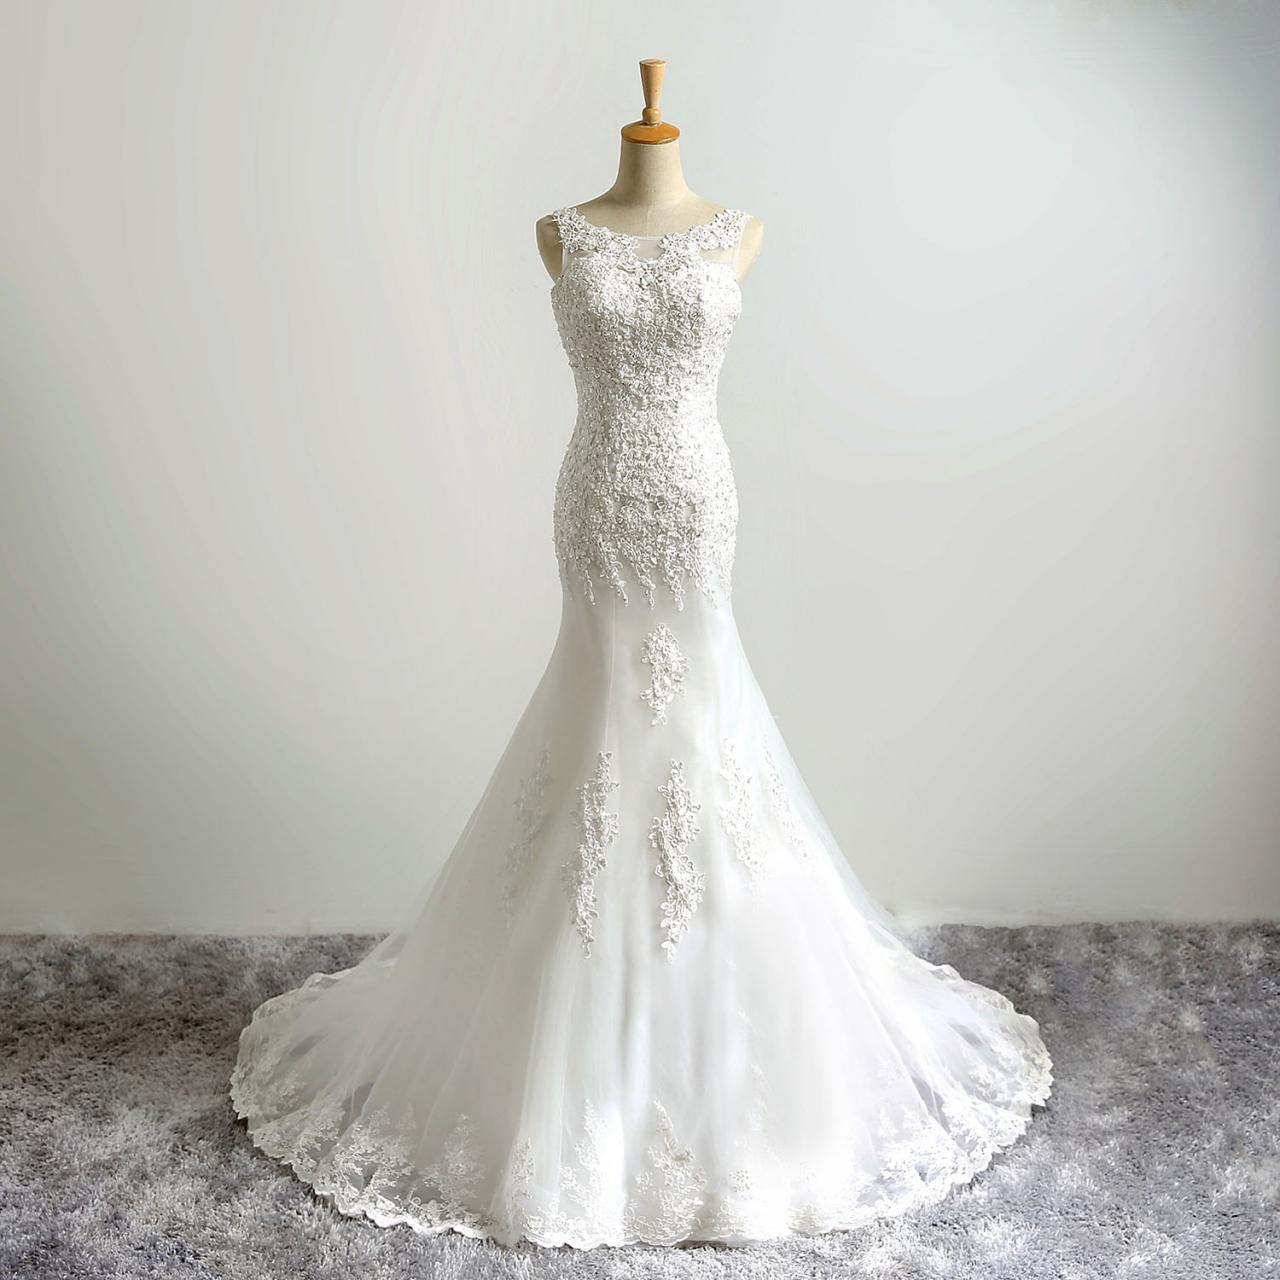 Lace Appliqué And Beaded Tulle Trumpet Wedding Dress Featuring Sheer Bateau Neckline And Lace-up Back